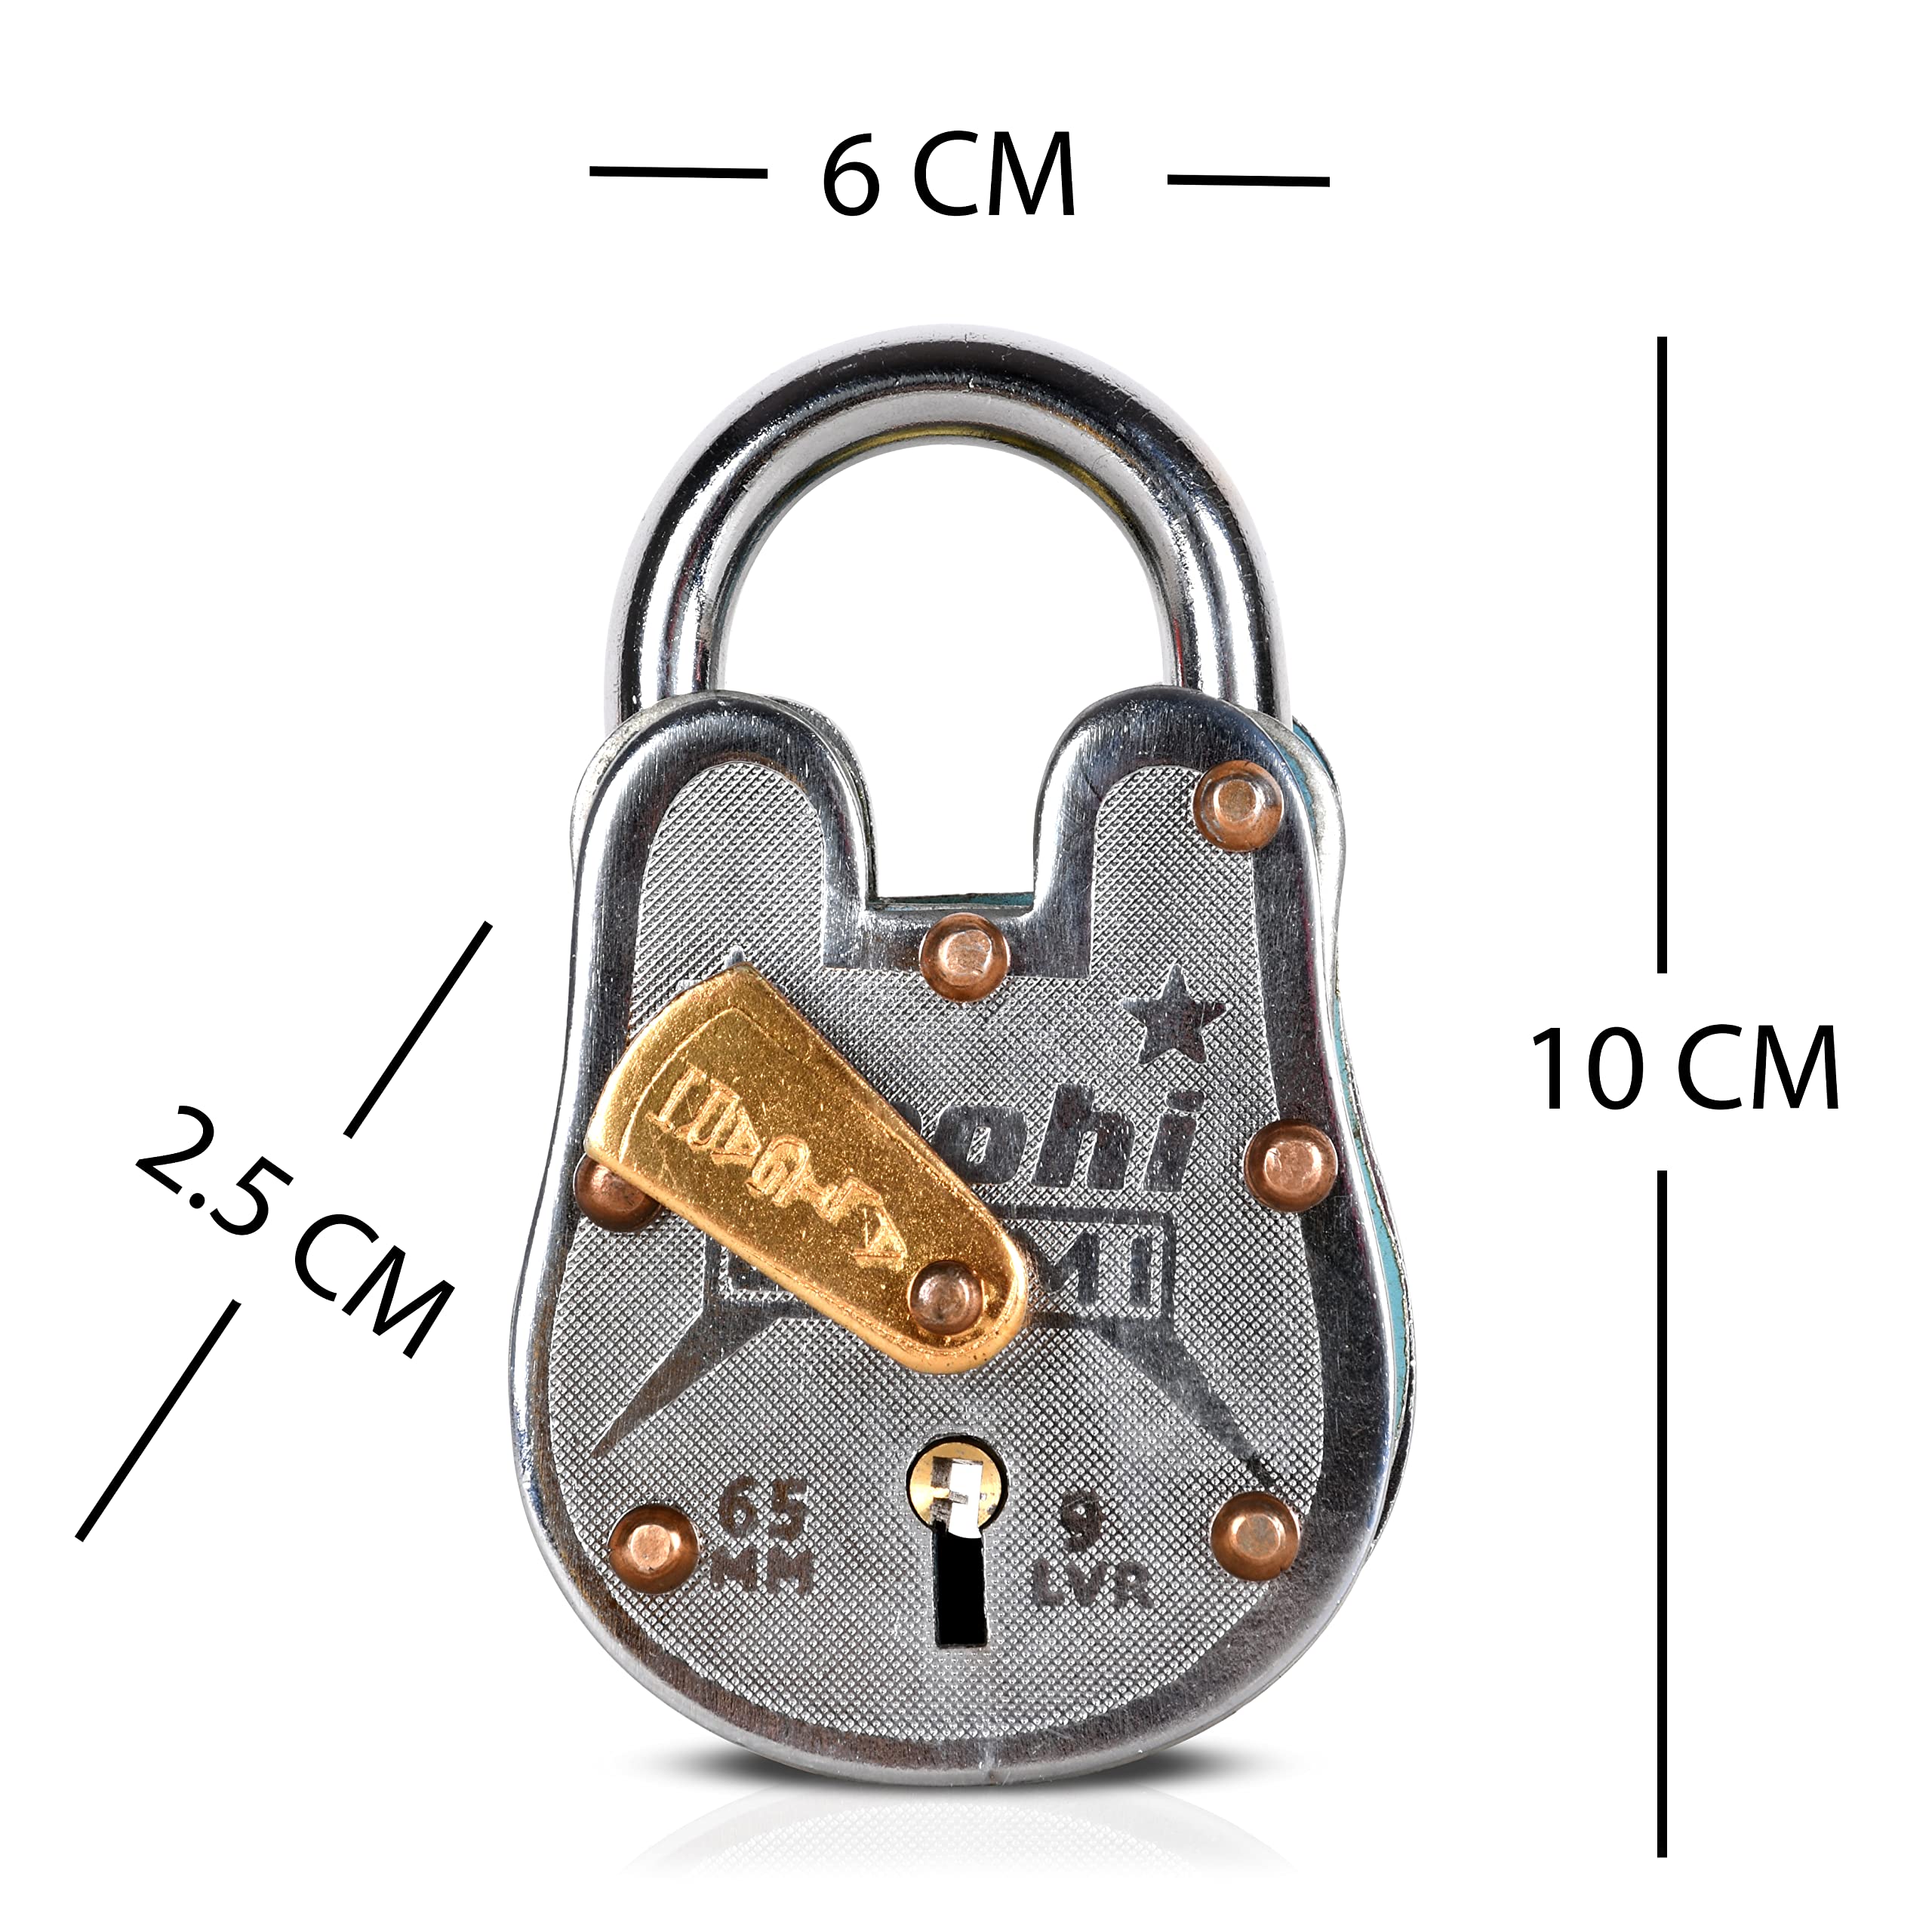 ROUND METAL Stainless Steel Antique Padlock Roohi (9 Levers 65mm Set Of 2) 9 Levers 65mm Double Locking & Key Imported Lock I Suitable Brass Antique Finish I Hudka Indor Lock And Men Door Lock Can Be Opareted Metal Locker I Entique Lock I Safty locker I D